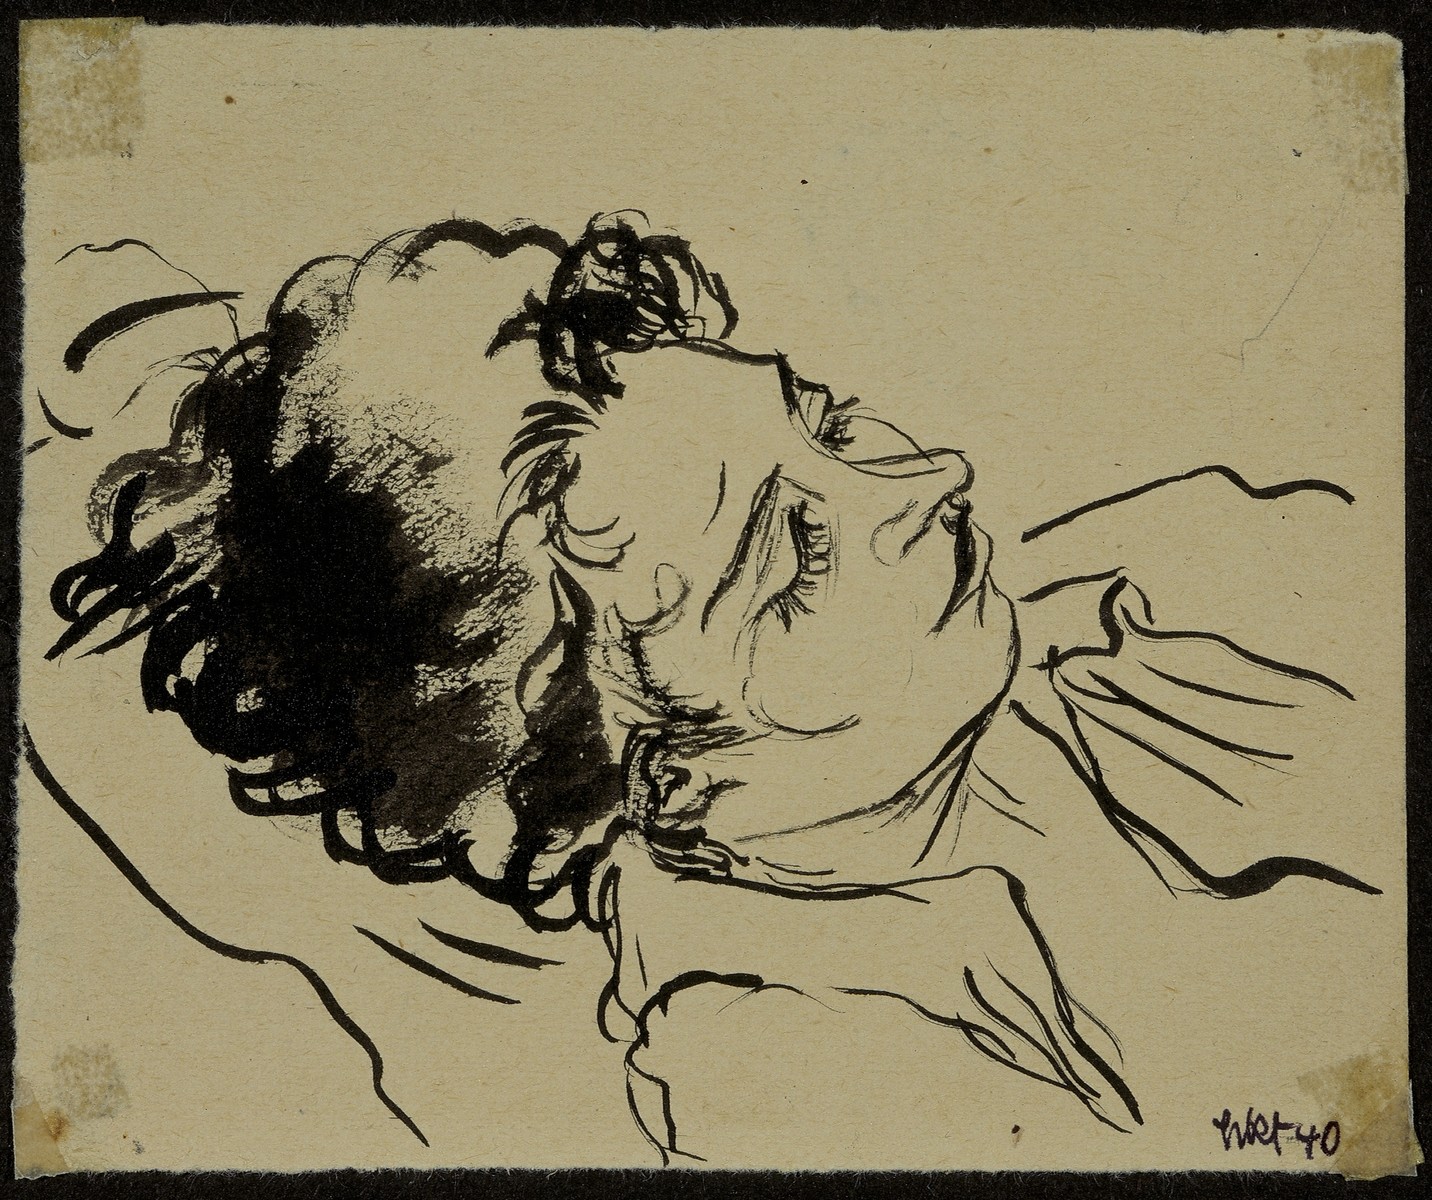 "Sleeping Inmate" by Lili Andrieux.  Sketch of head and shoulders of woman asleep.